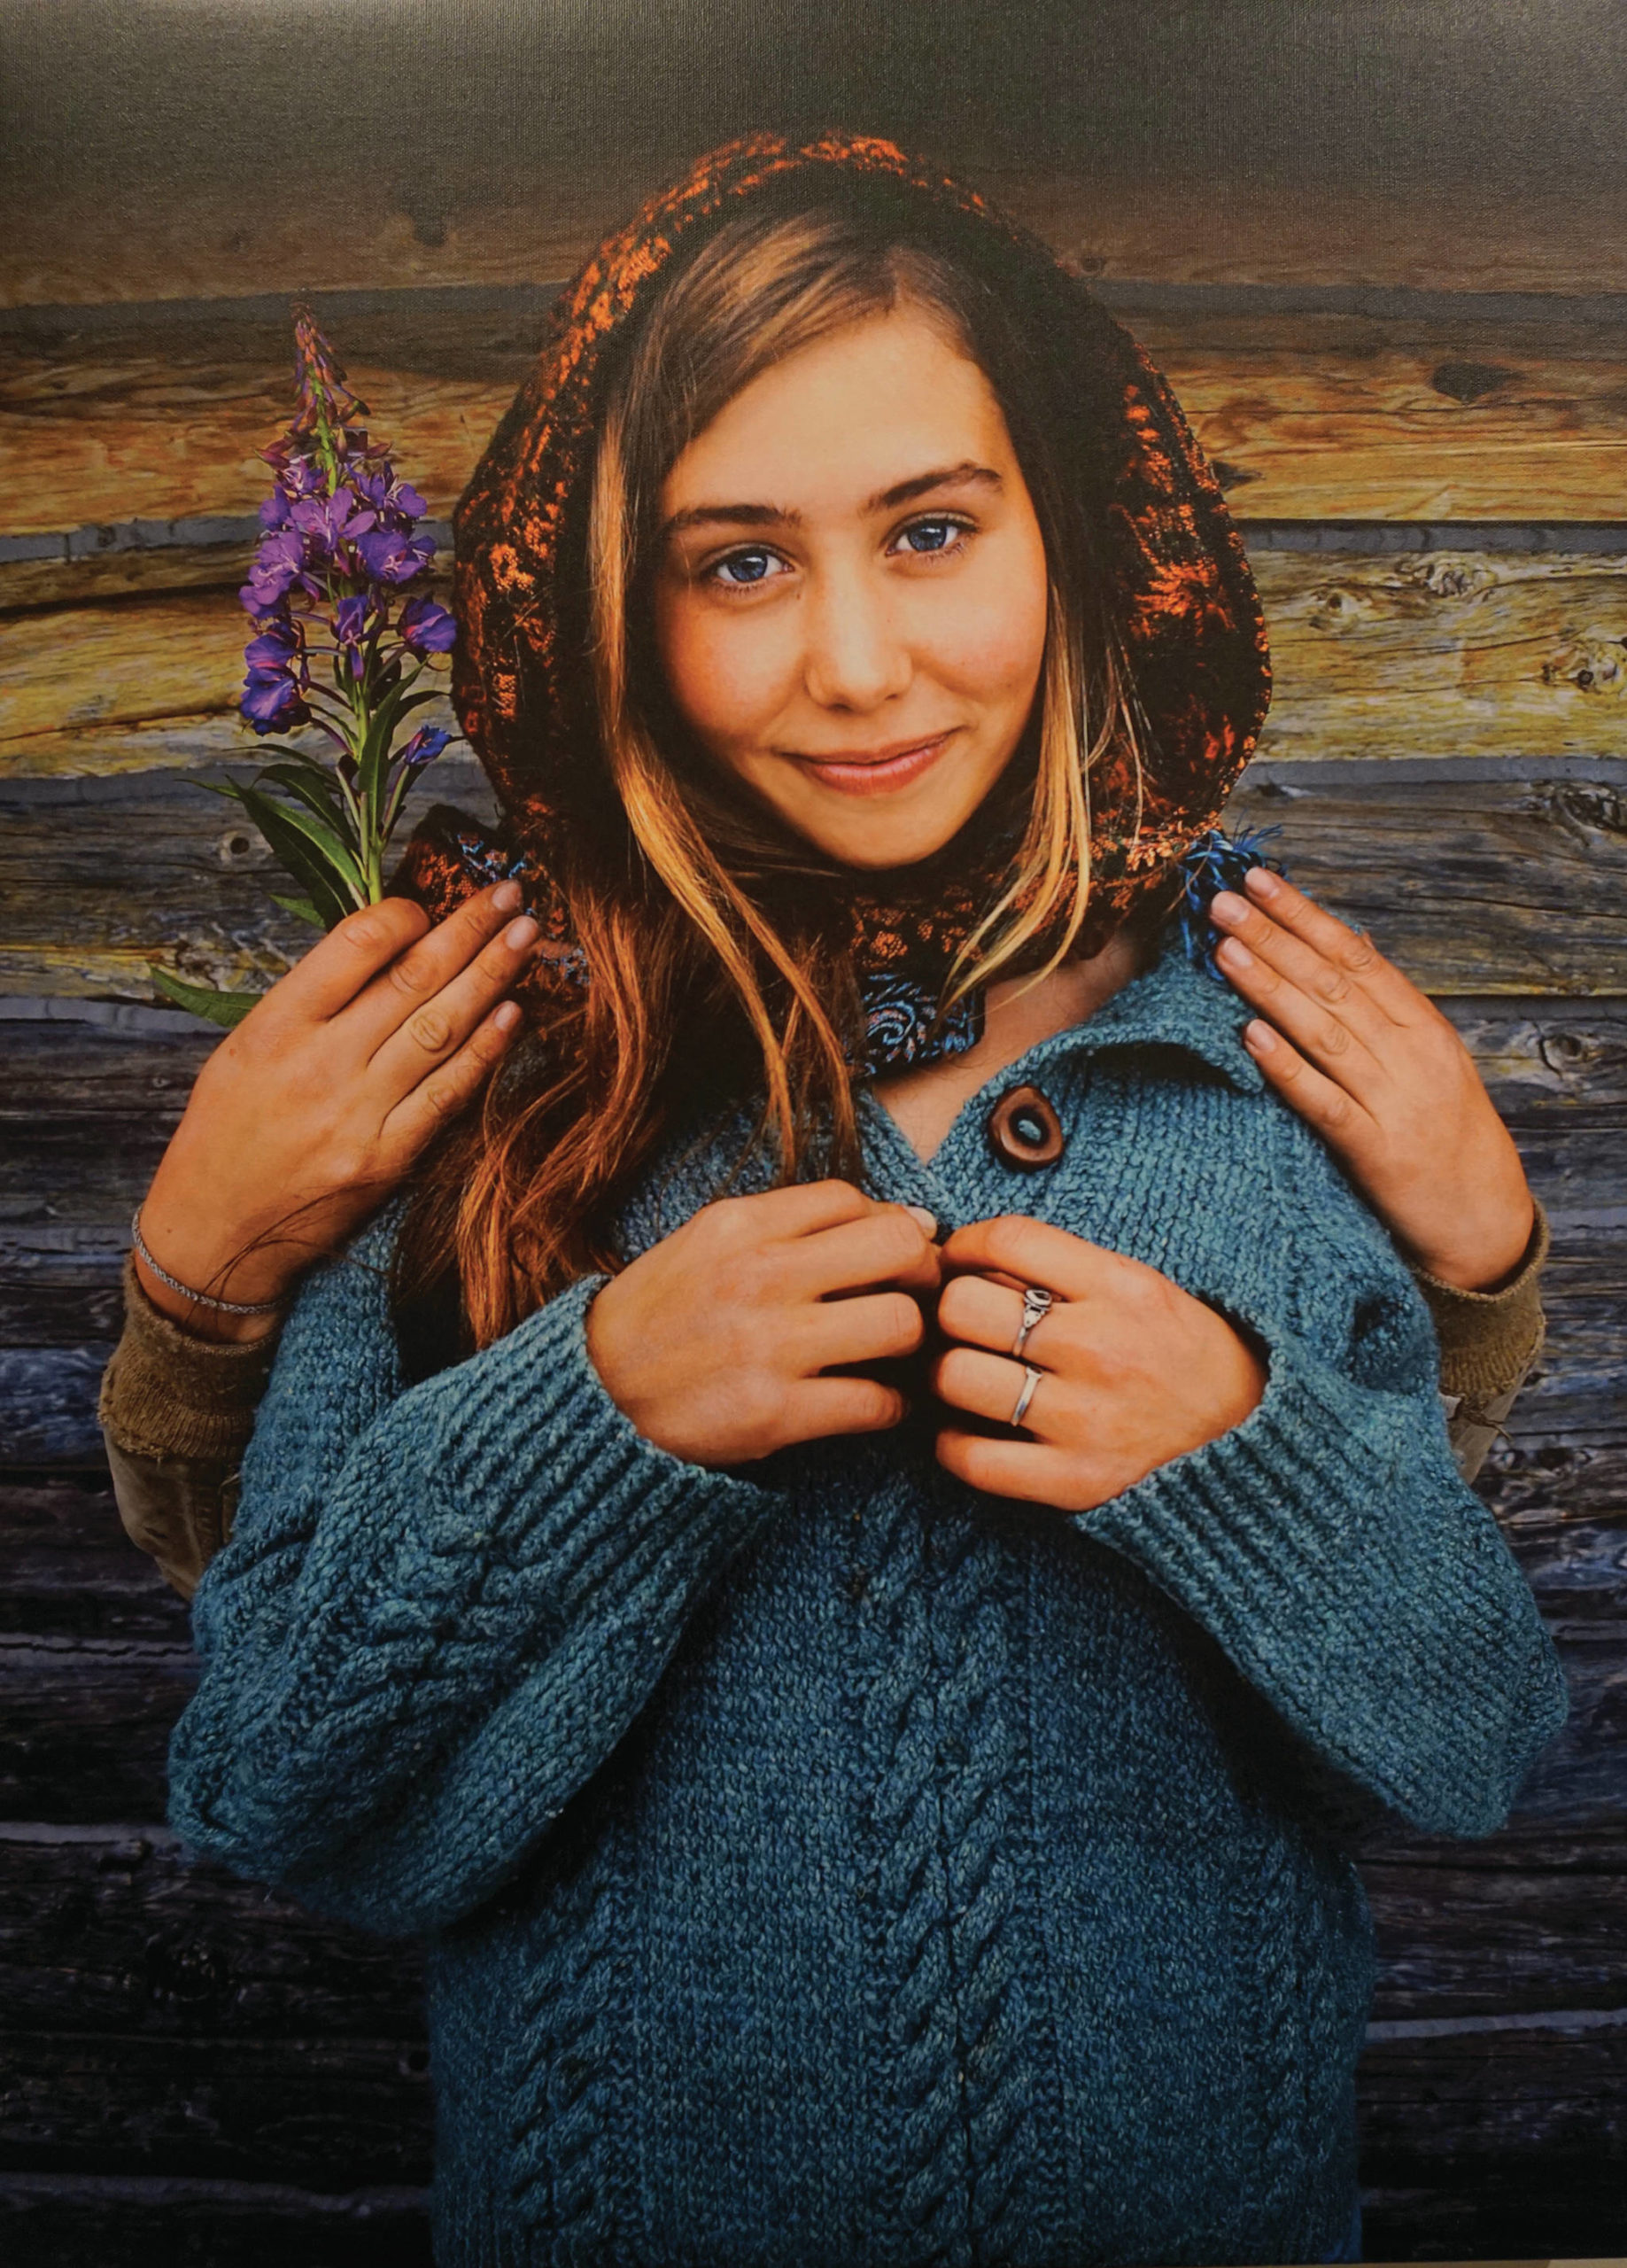 Linda Smogor’s portrait, “Oshi with Thorey,” is one of the works included in “Familiar Faces: Portrait of a Community,” on exhibit through May 2021 at the Pratt Museum in Homer, Alaska. (Photo by Michael Armstrong/Homer News)